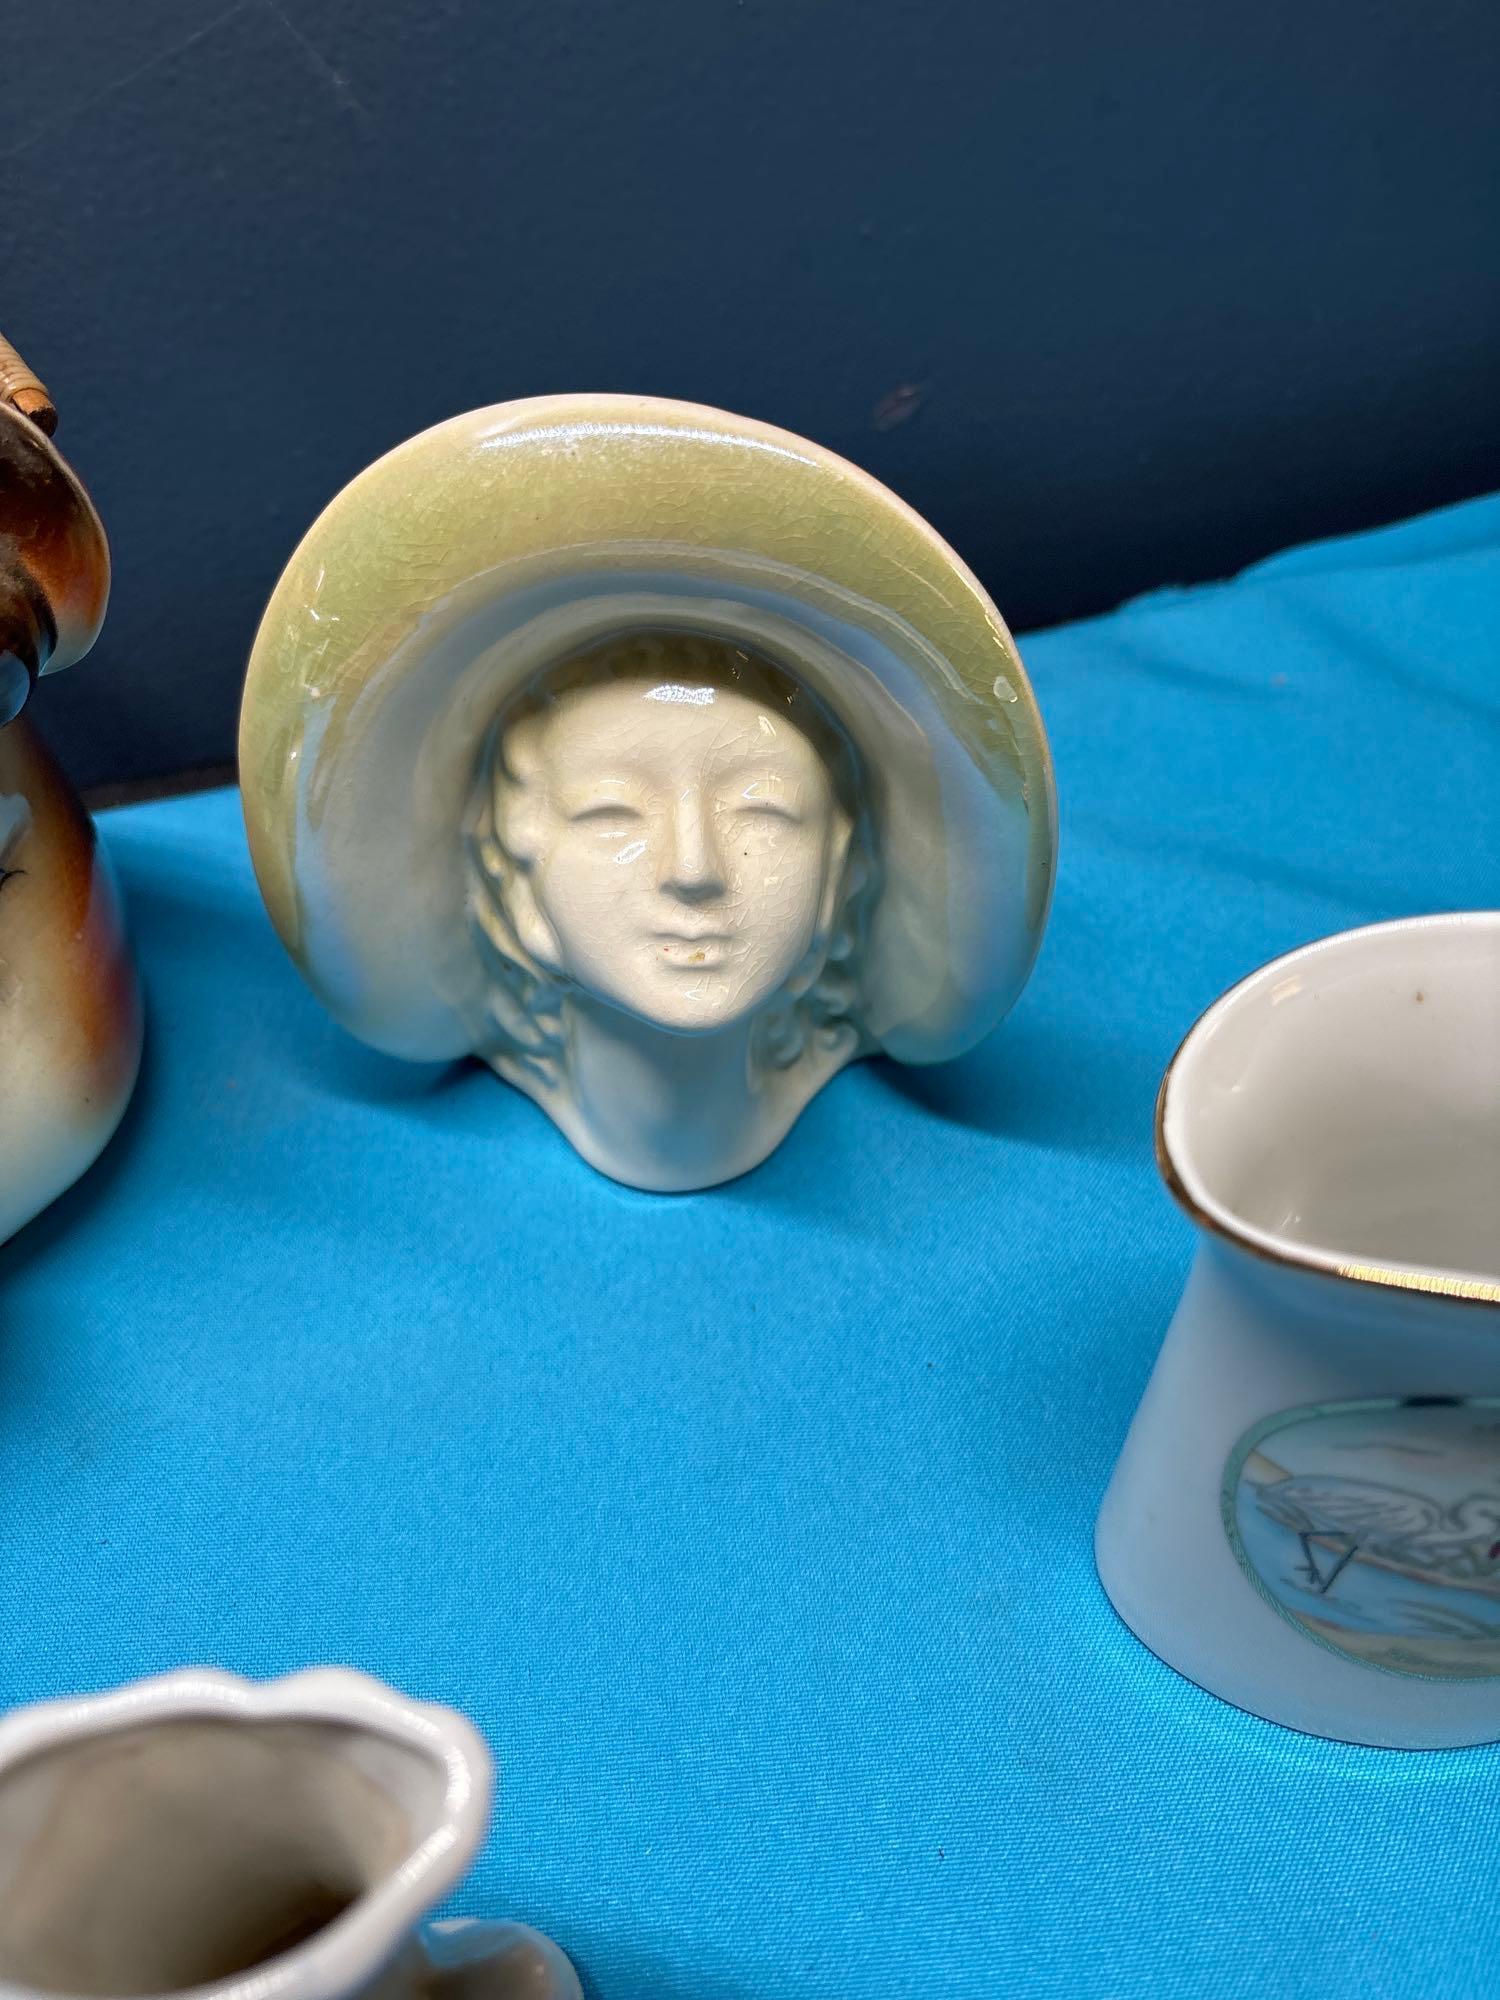 Head Vases and other pottery